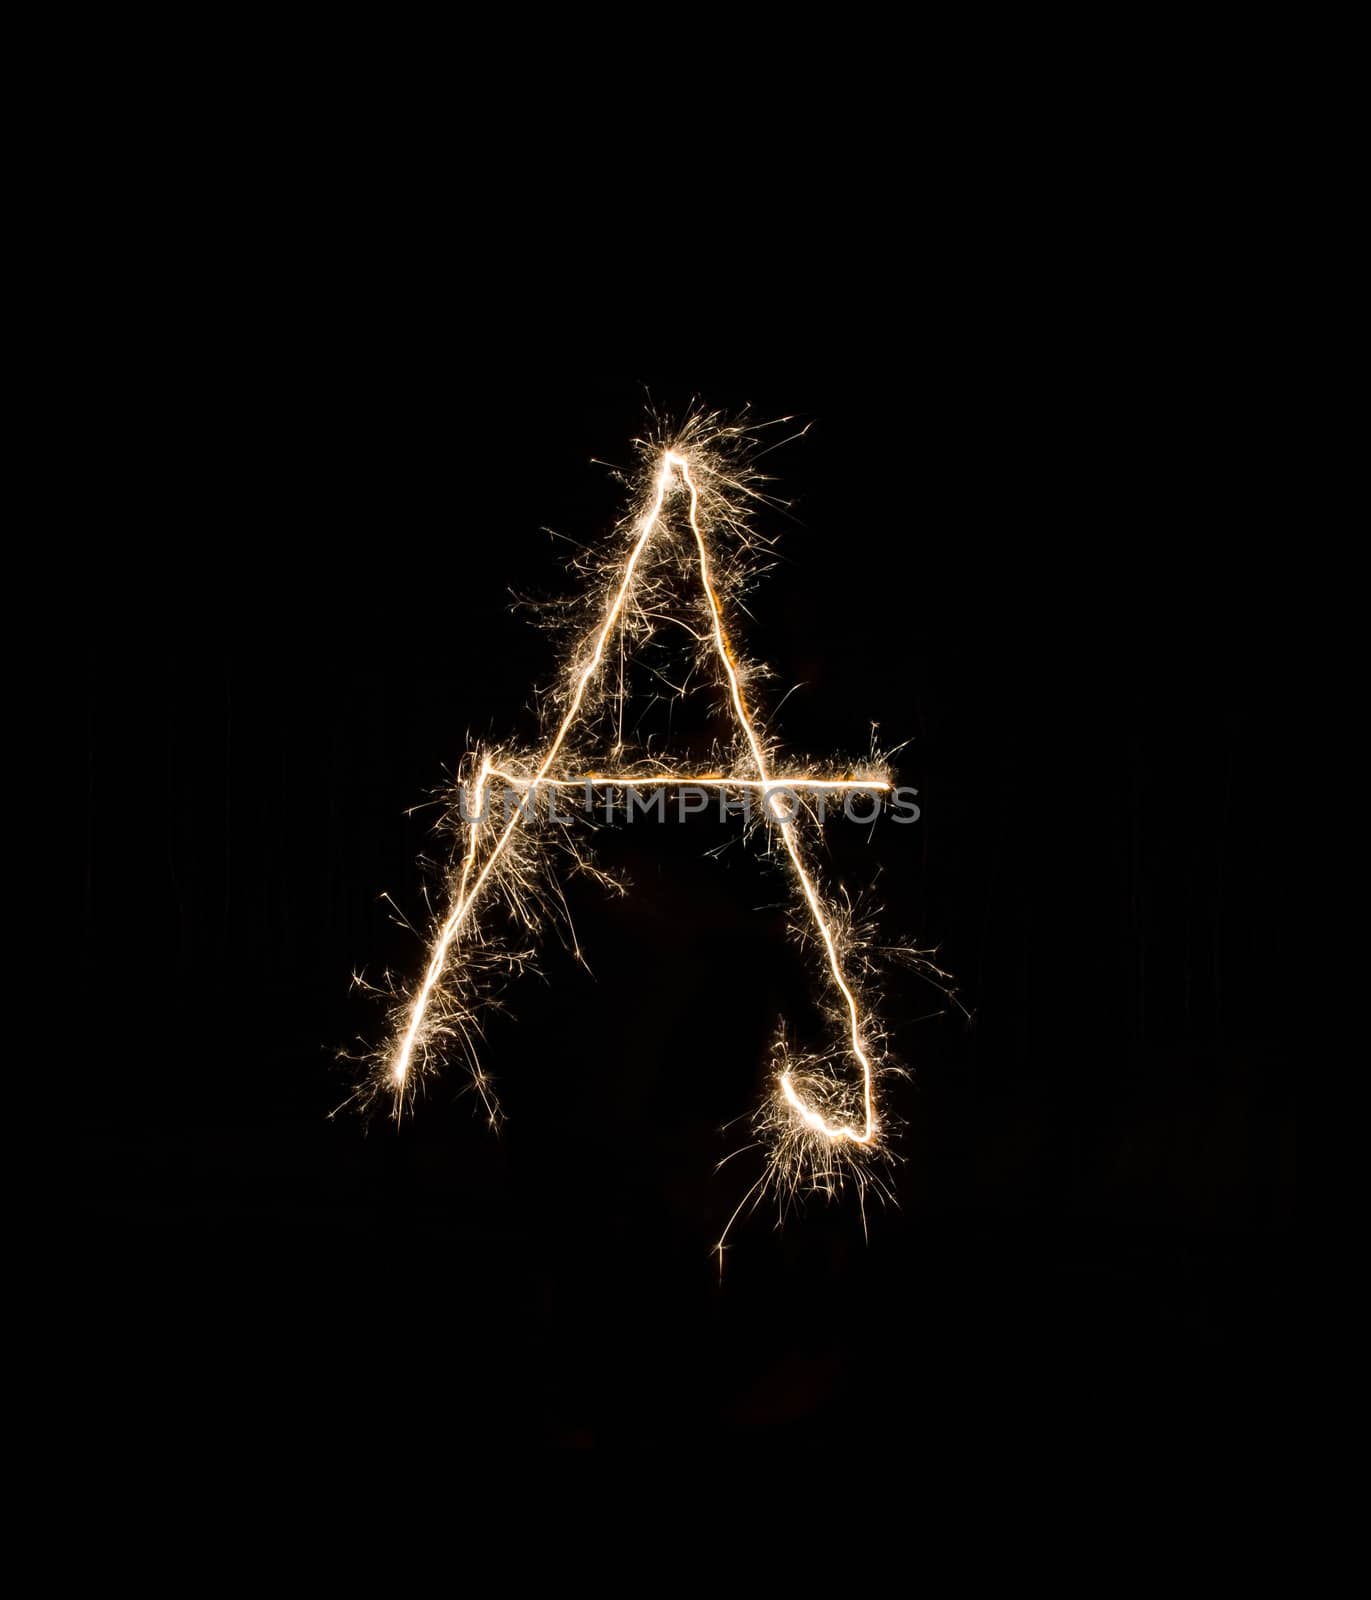 Letter A drew with spakrs on a black background.